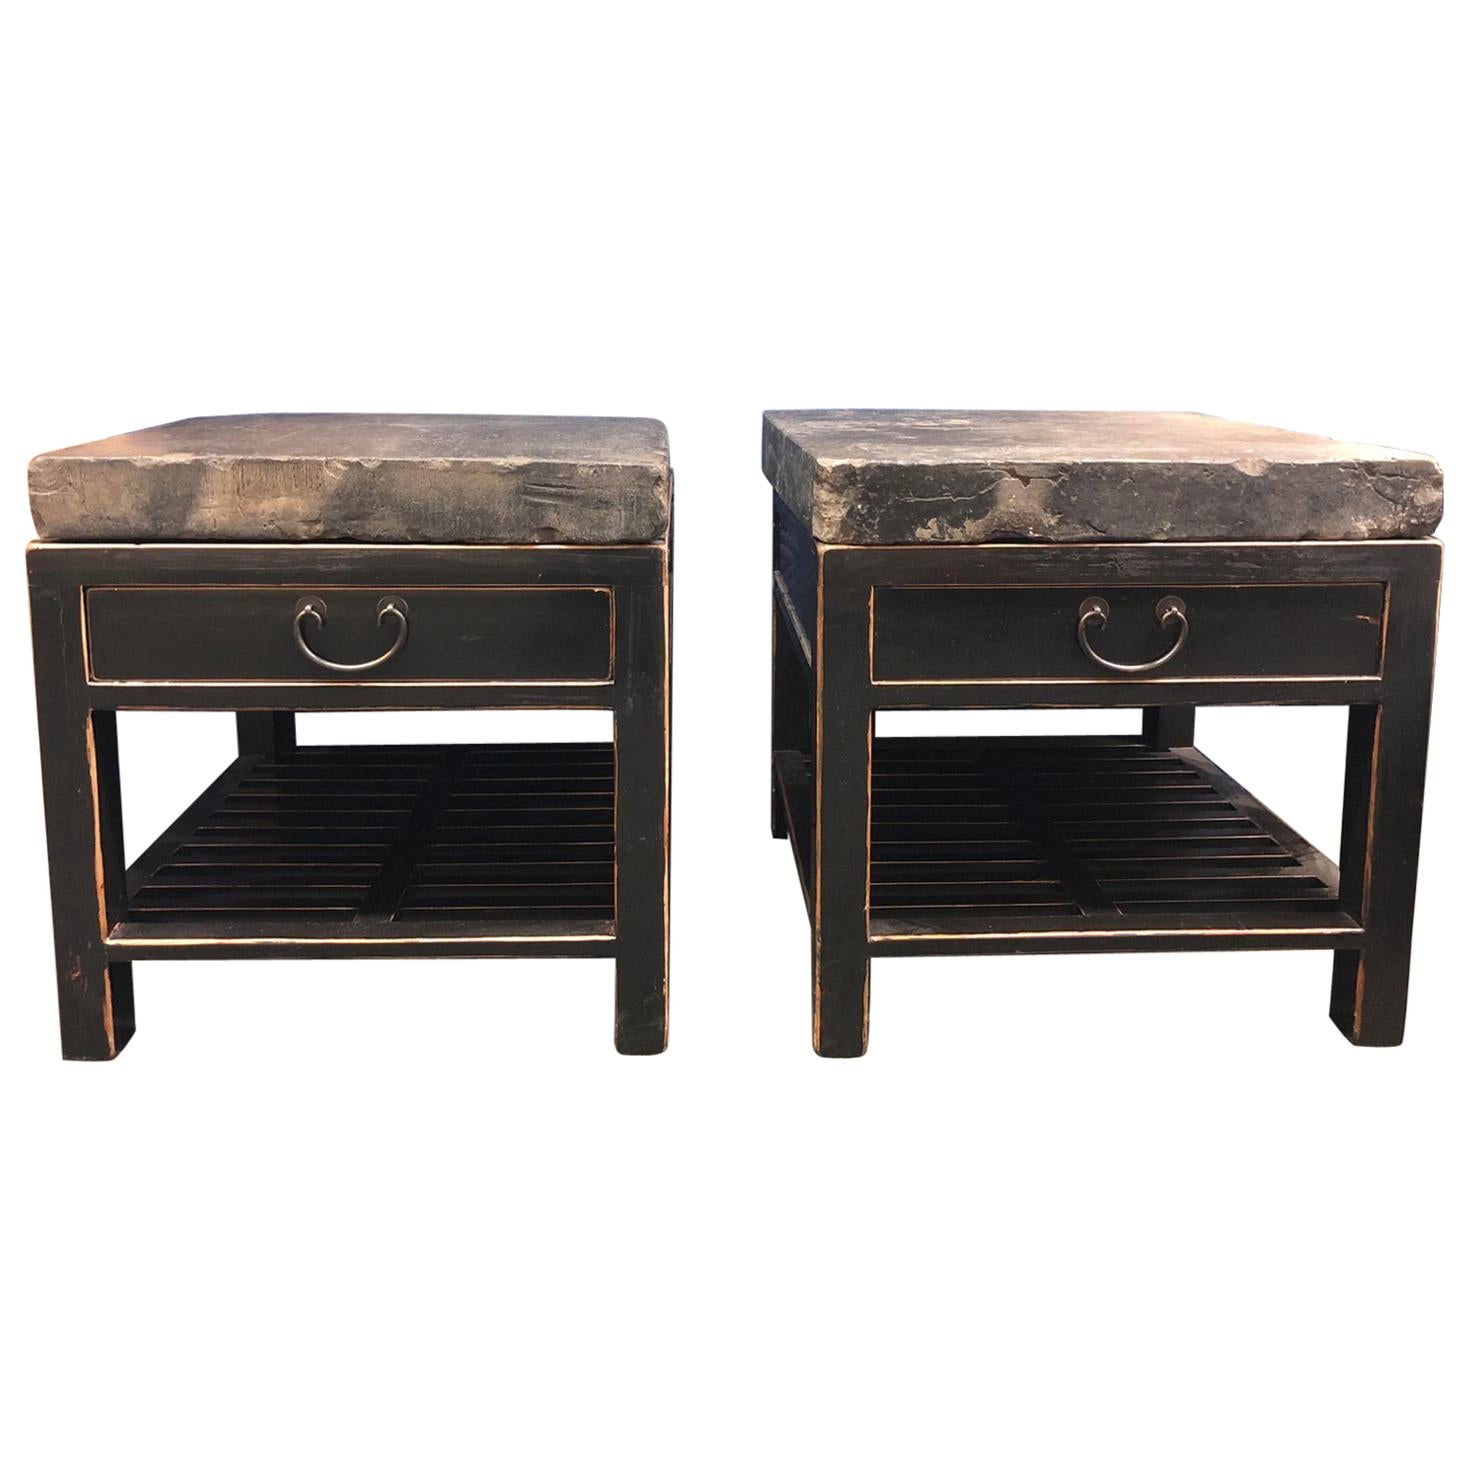 Chinese Stone Top Side Tables or Nightstands, a Pair